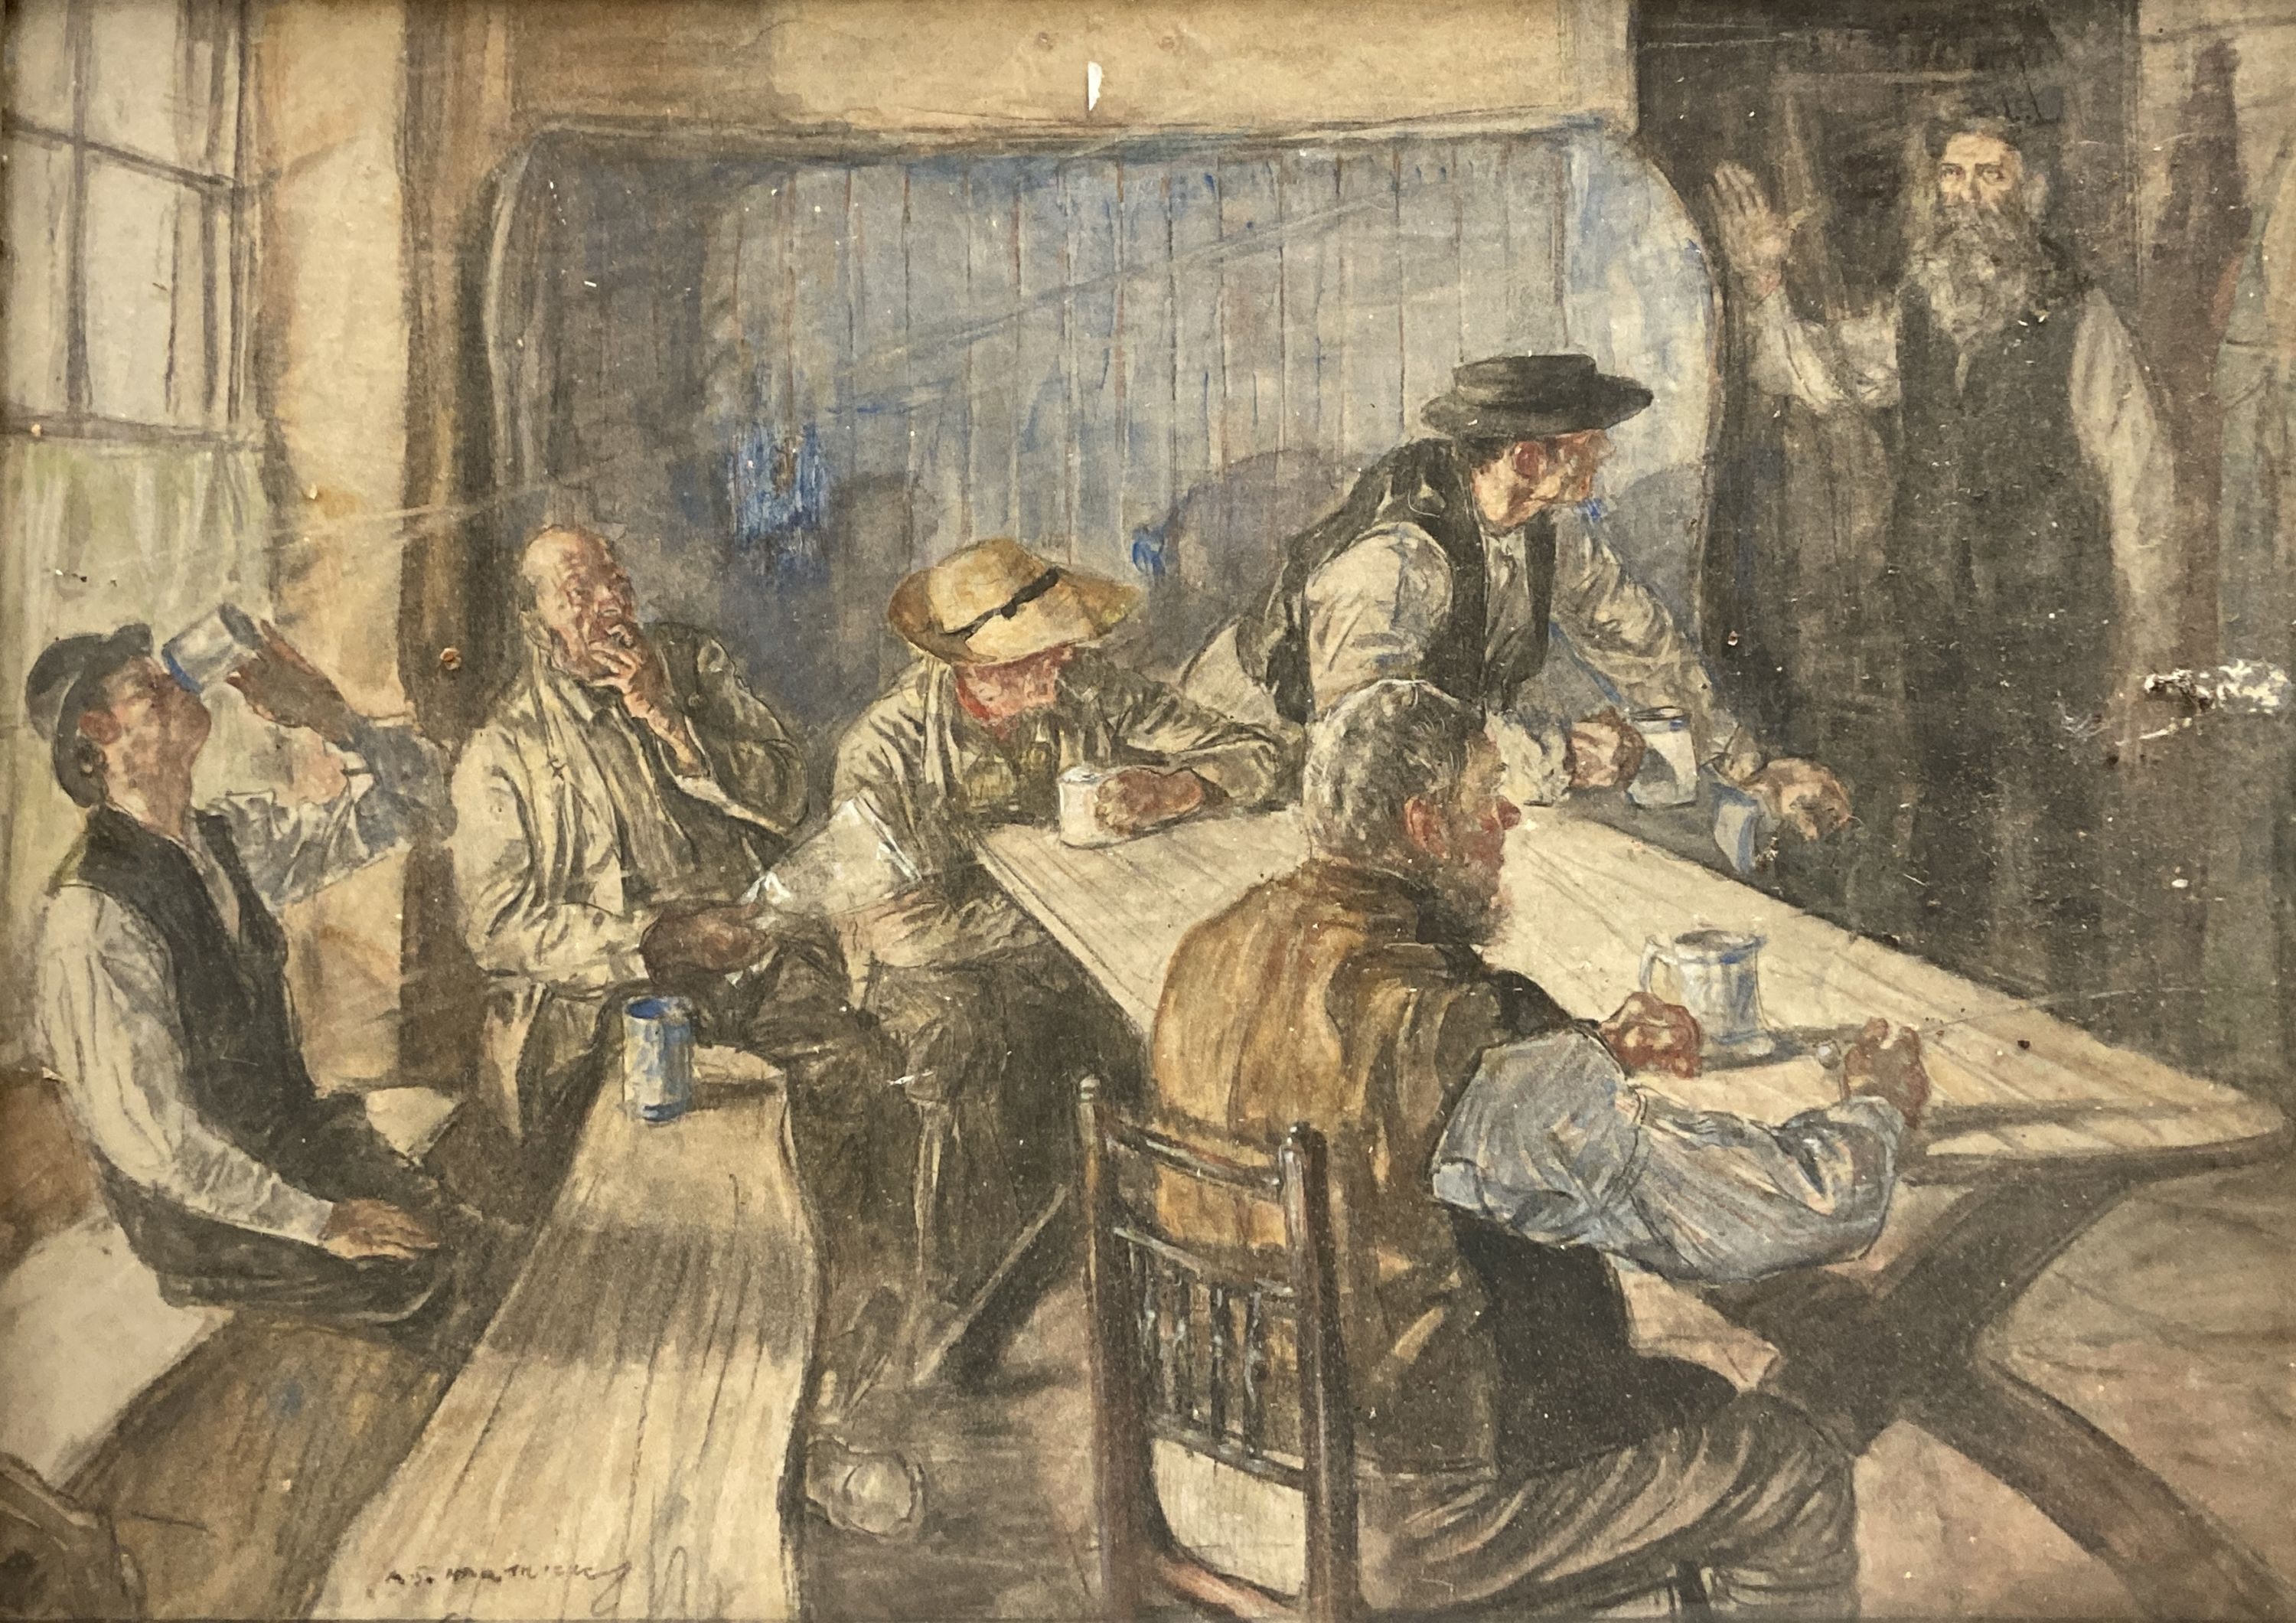 Archibald Standish Hartrick (1865-1950), watercolour, Tavern scene, signed and dated 1906, 28 x 39cm